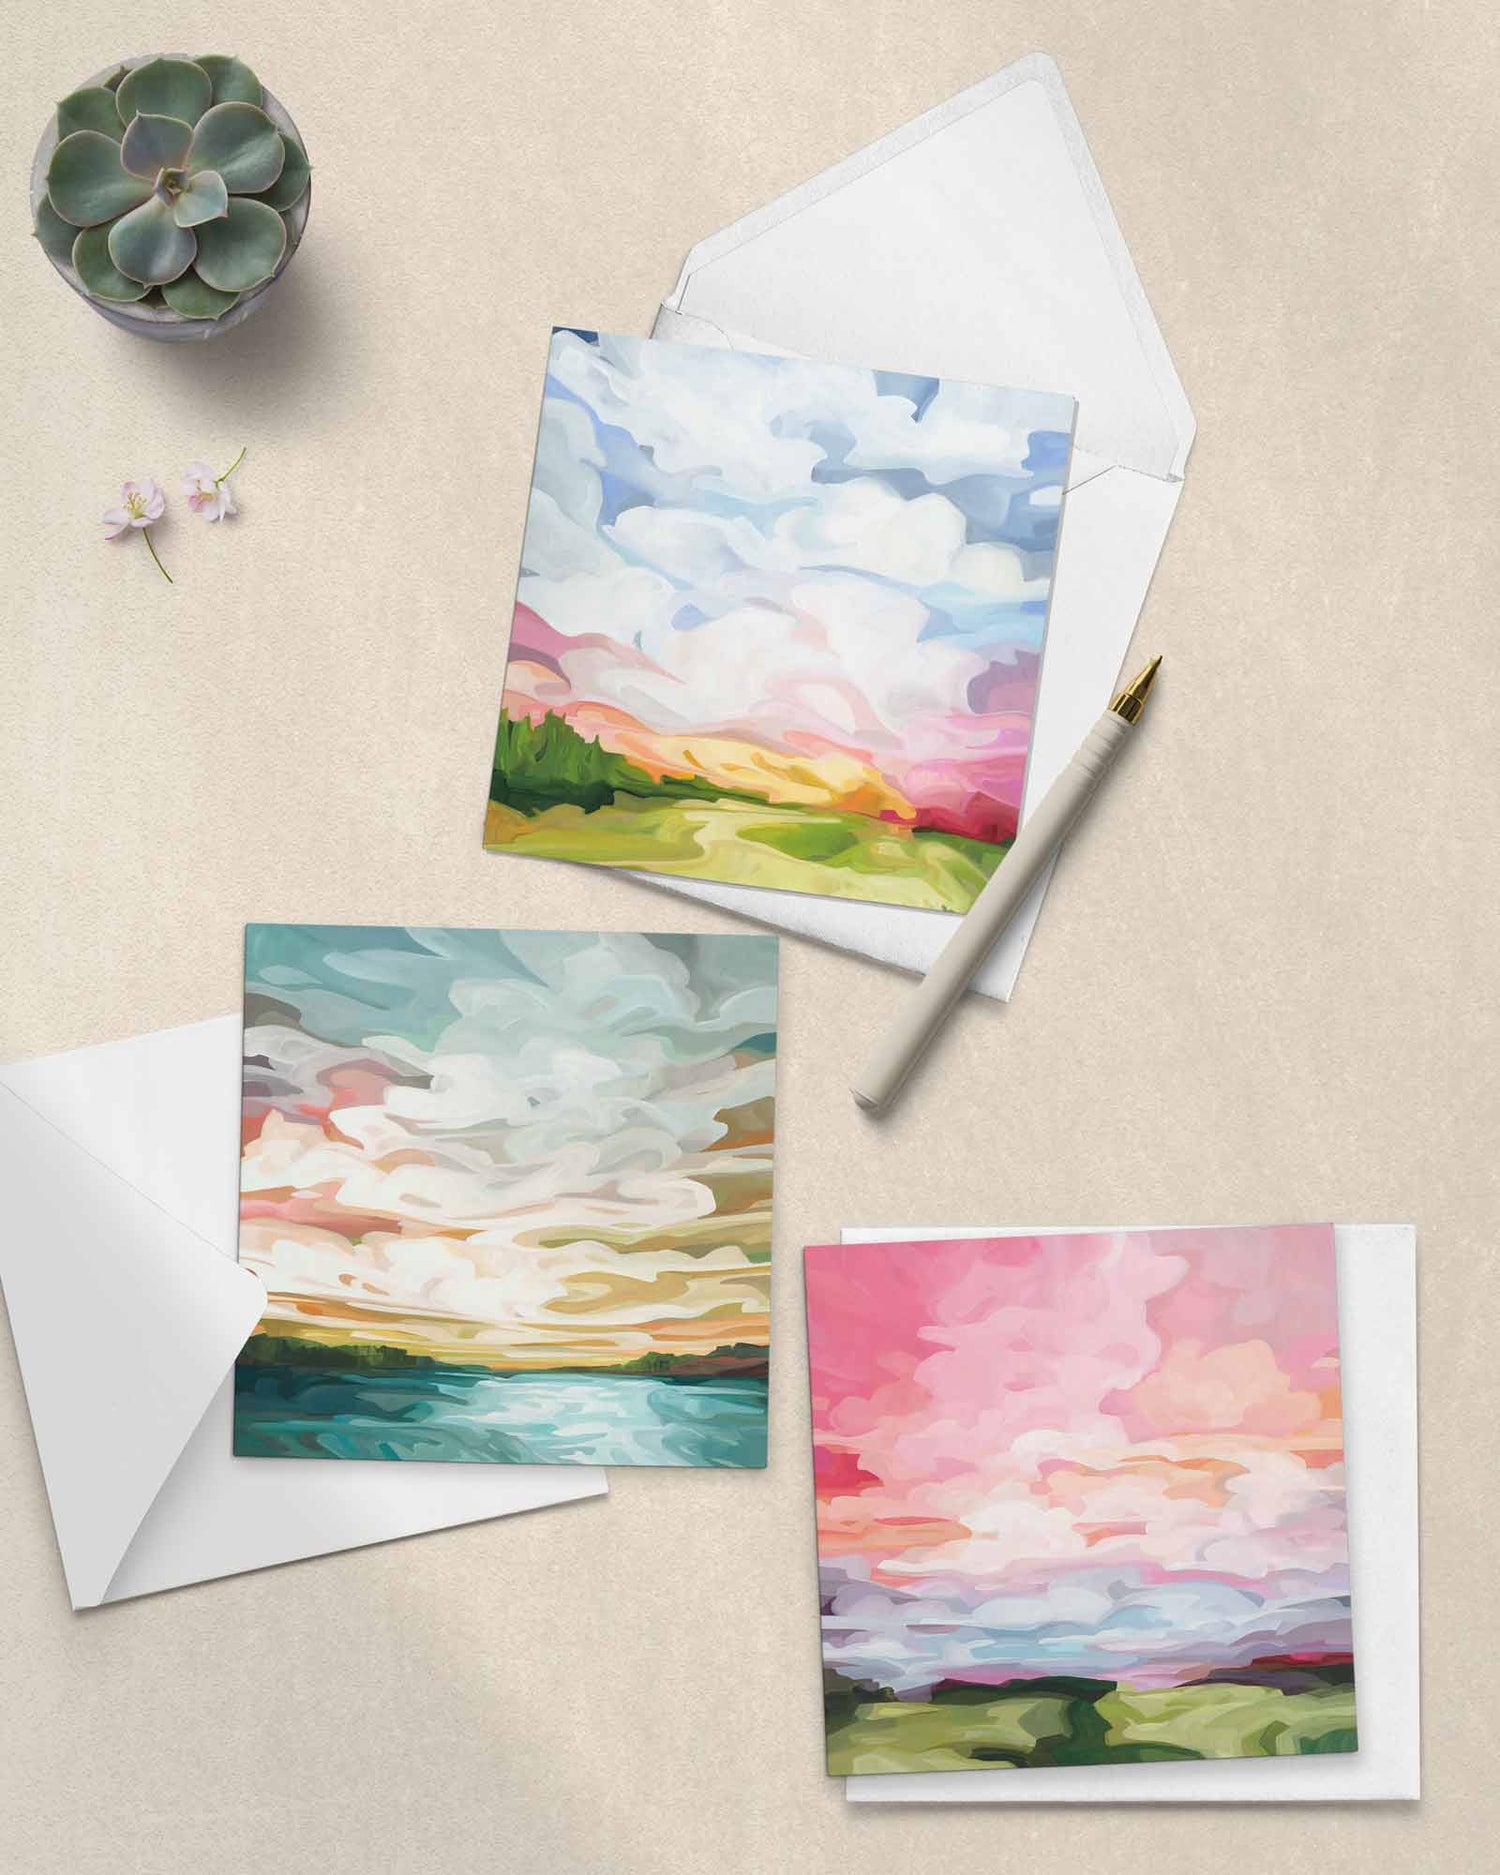 three colourful art greeting cards with paintings of abstract skies